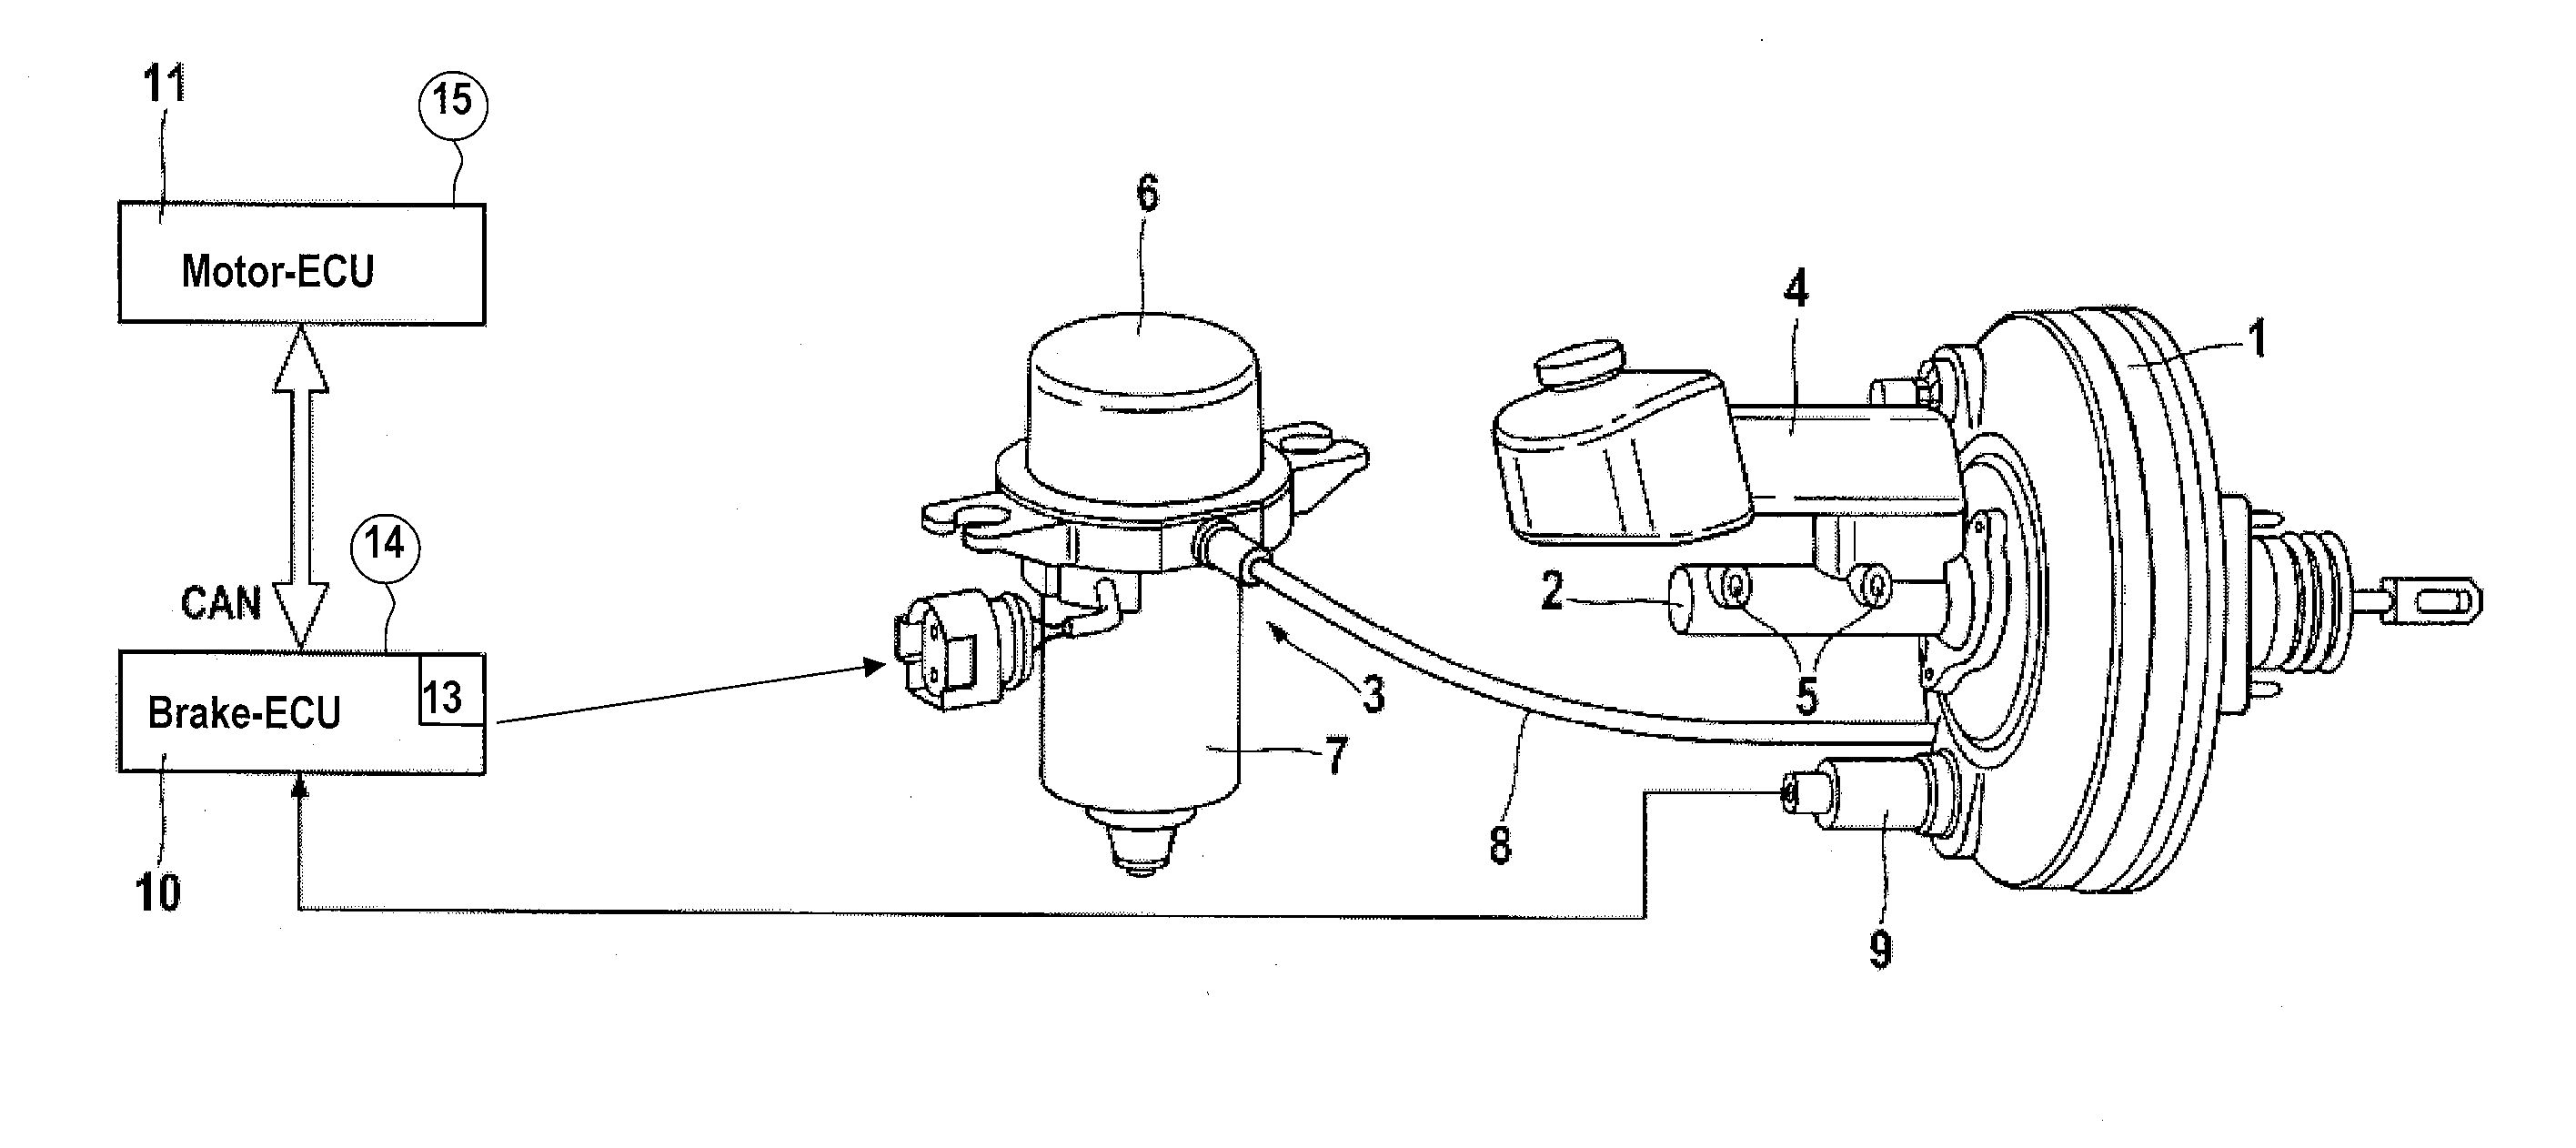 Device for supplying pressure to an actuation unit of a motor vehicle brake system and method for controlling said device